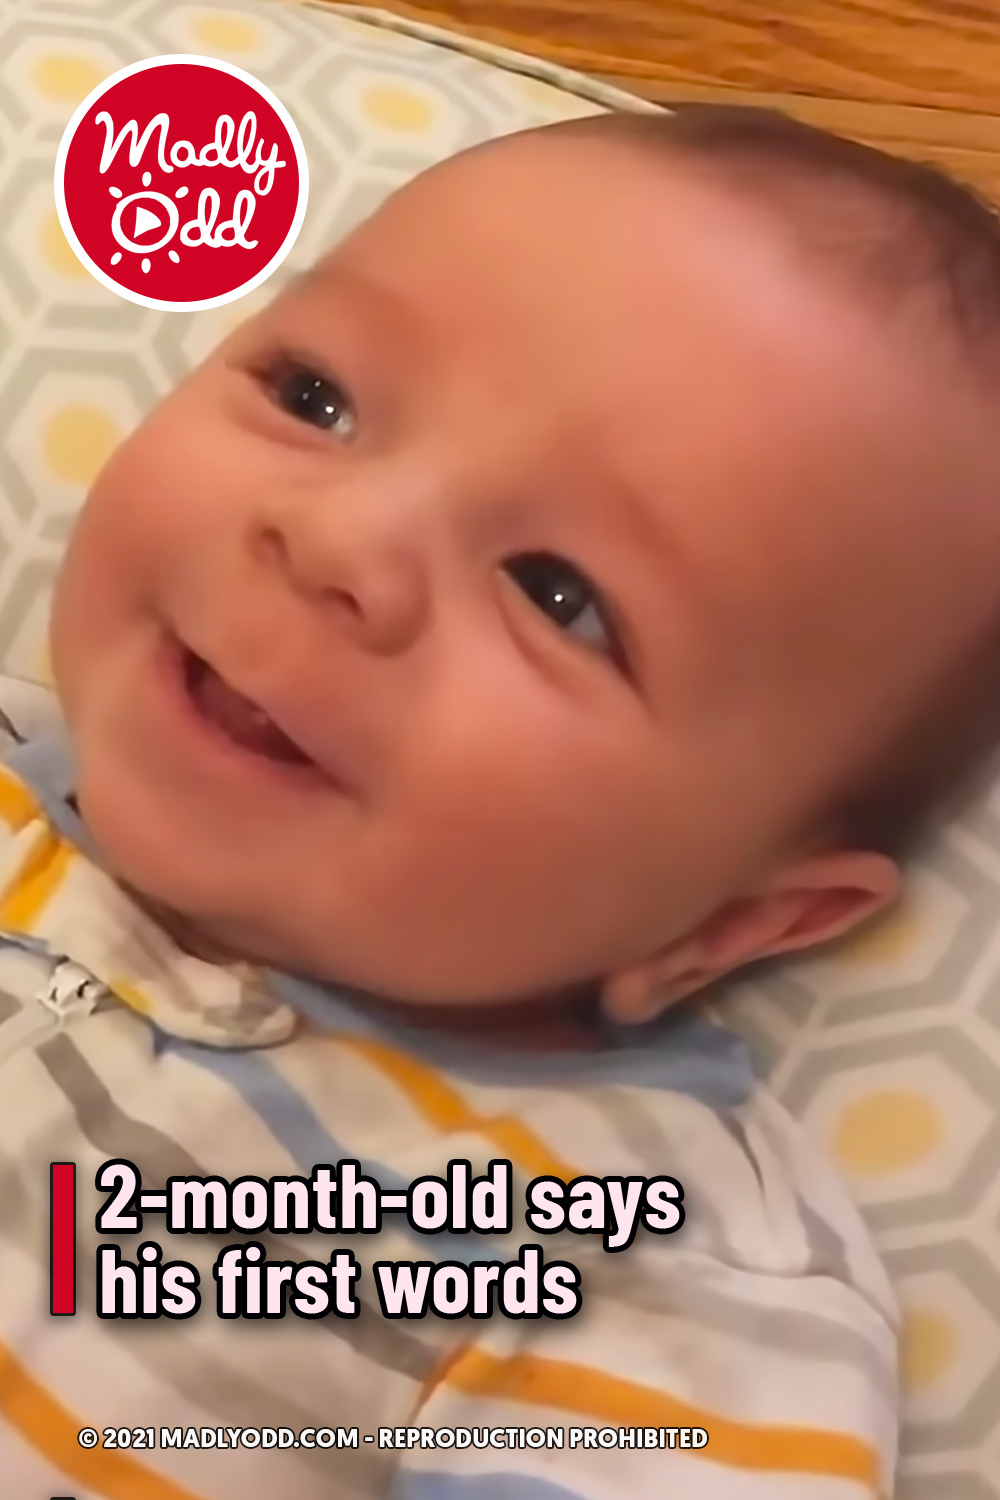 2-month-old says his first words